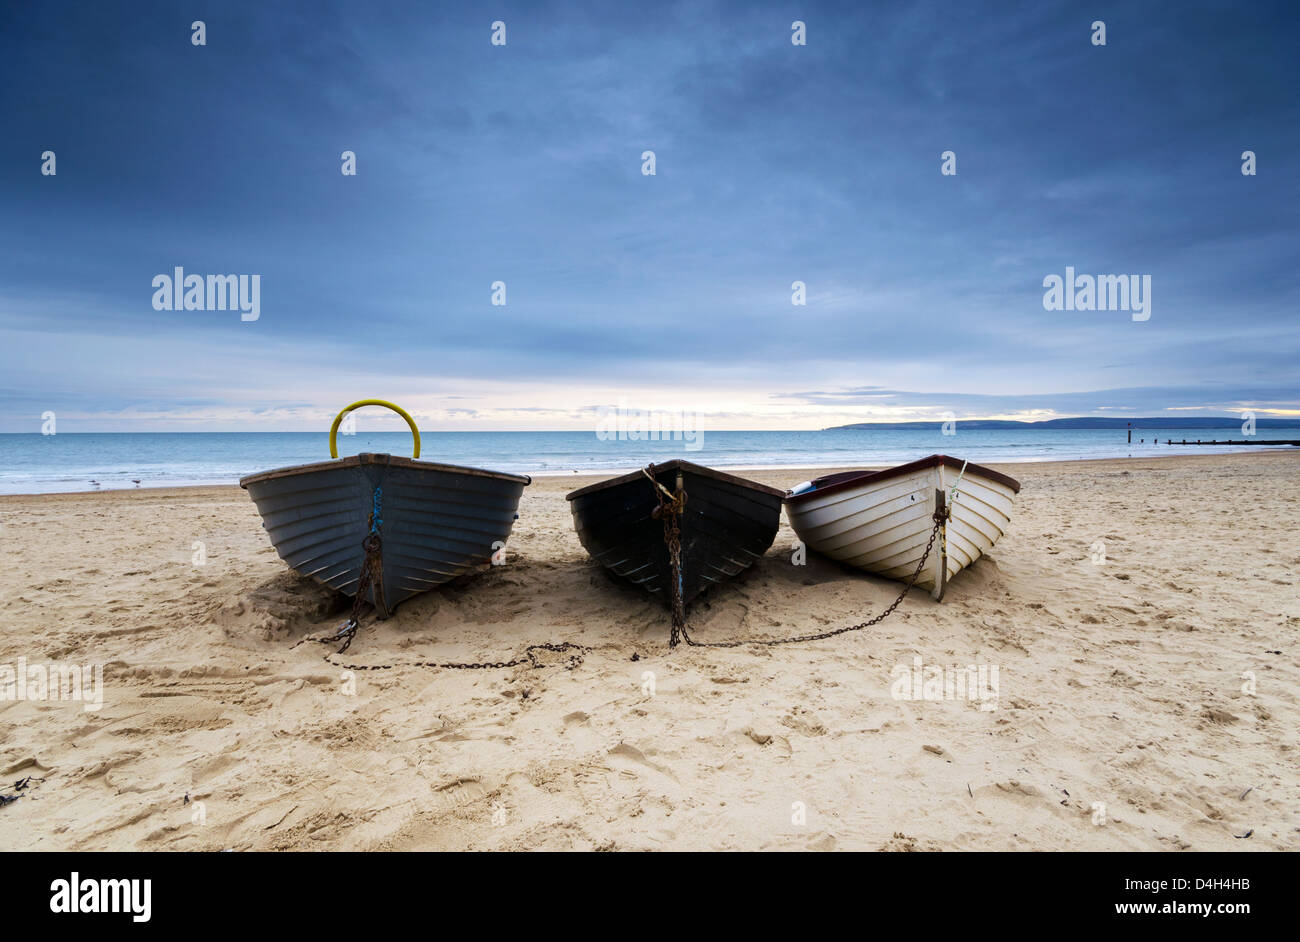 Fishing boats under a brooding sky at Durley Chine on Bournemouth beach. Stock Photo